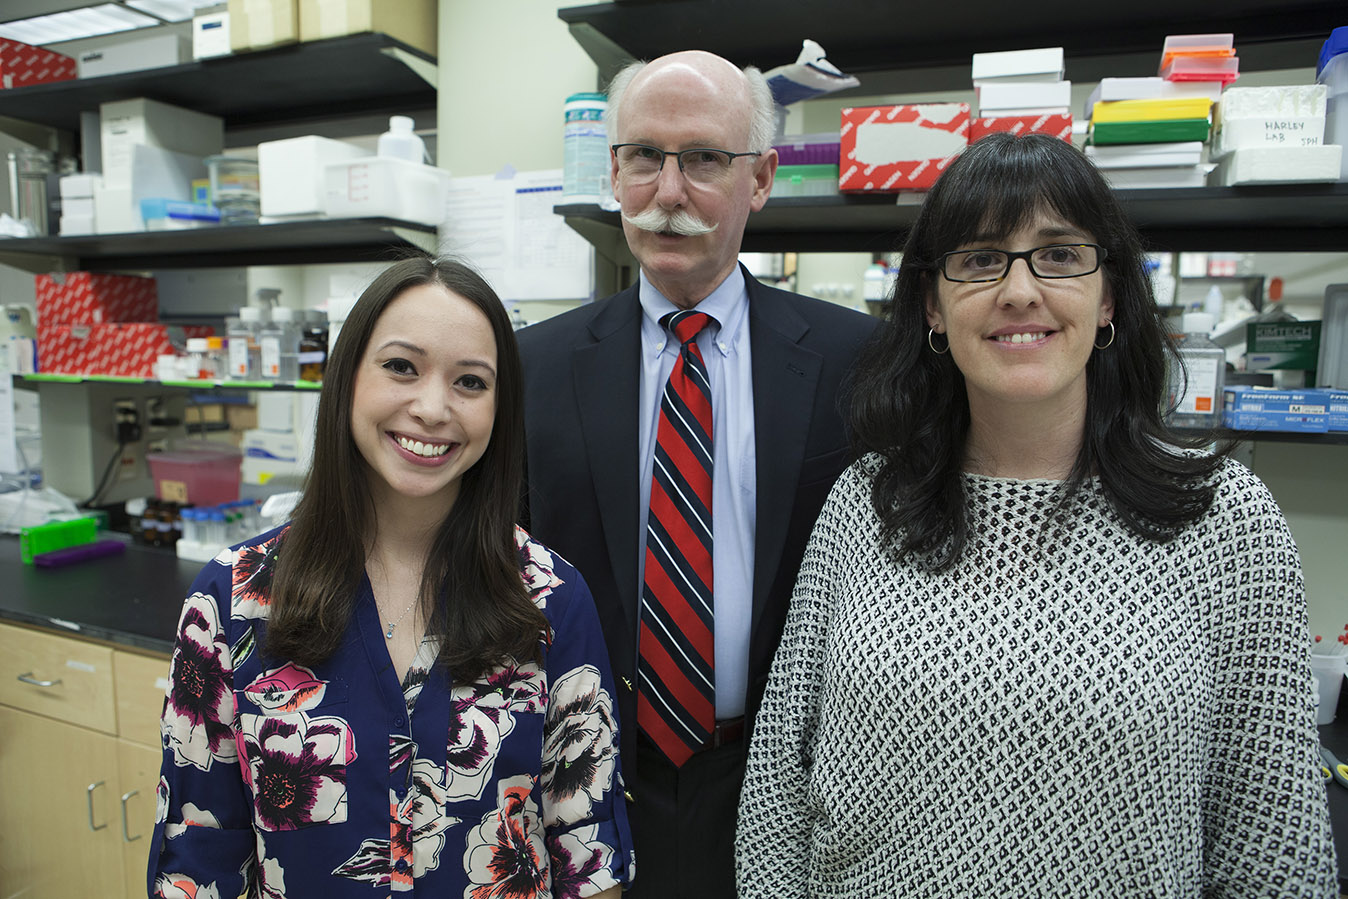 Illinios alumnus and former manager of Ecolab Scott Fisher (center) with graduate student Samantha Zambuto (left) and Research Scientist Sara Pedron Haba